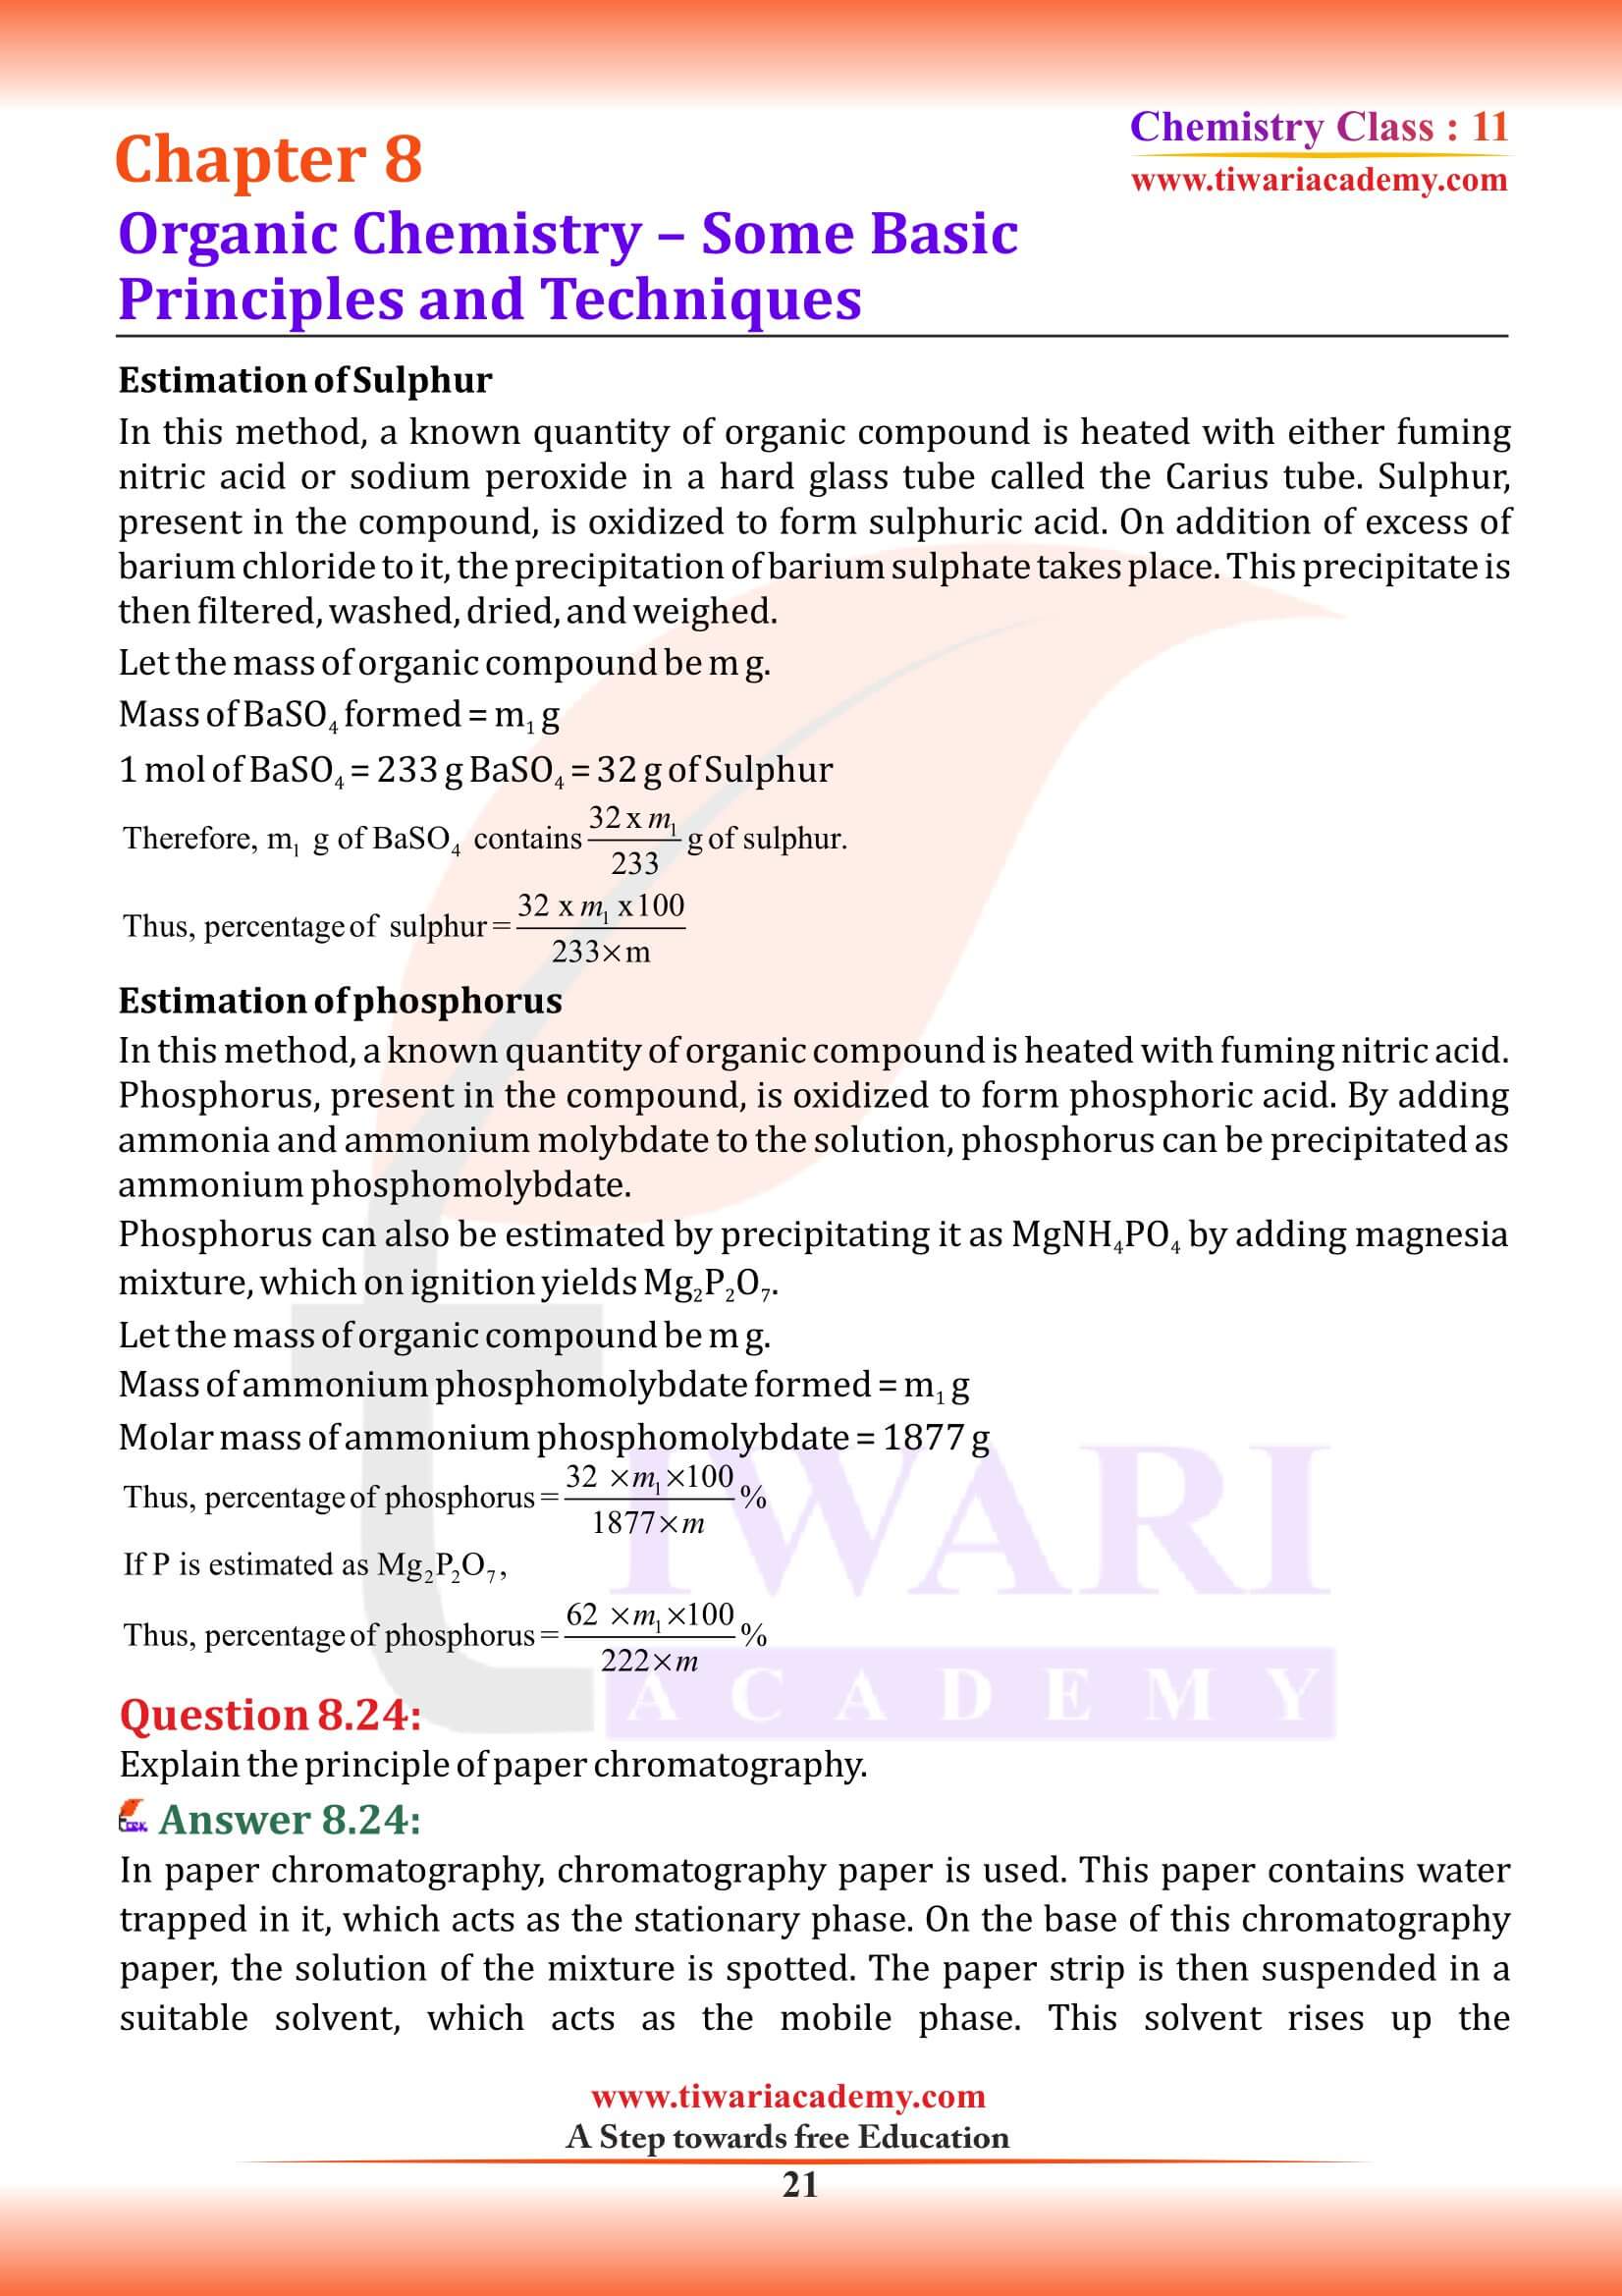 Class 11 Chemistry Chapter 8 download